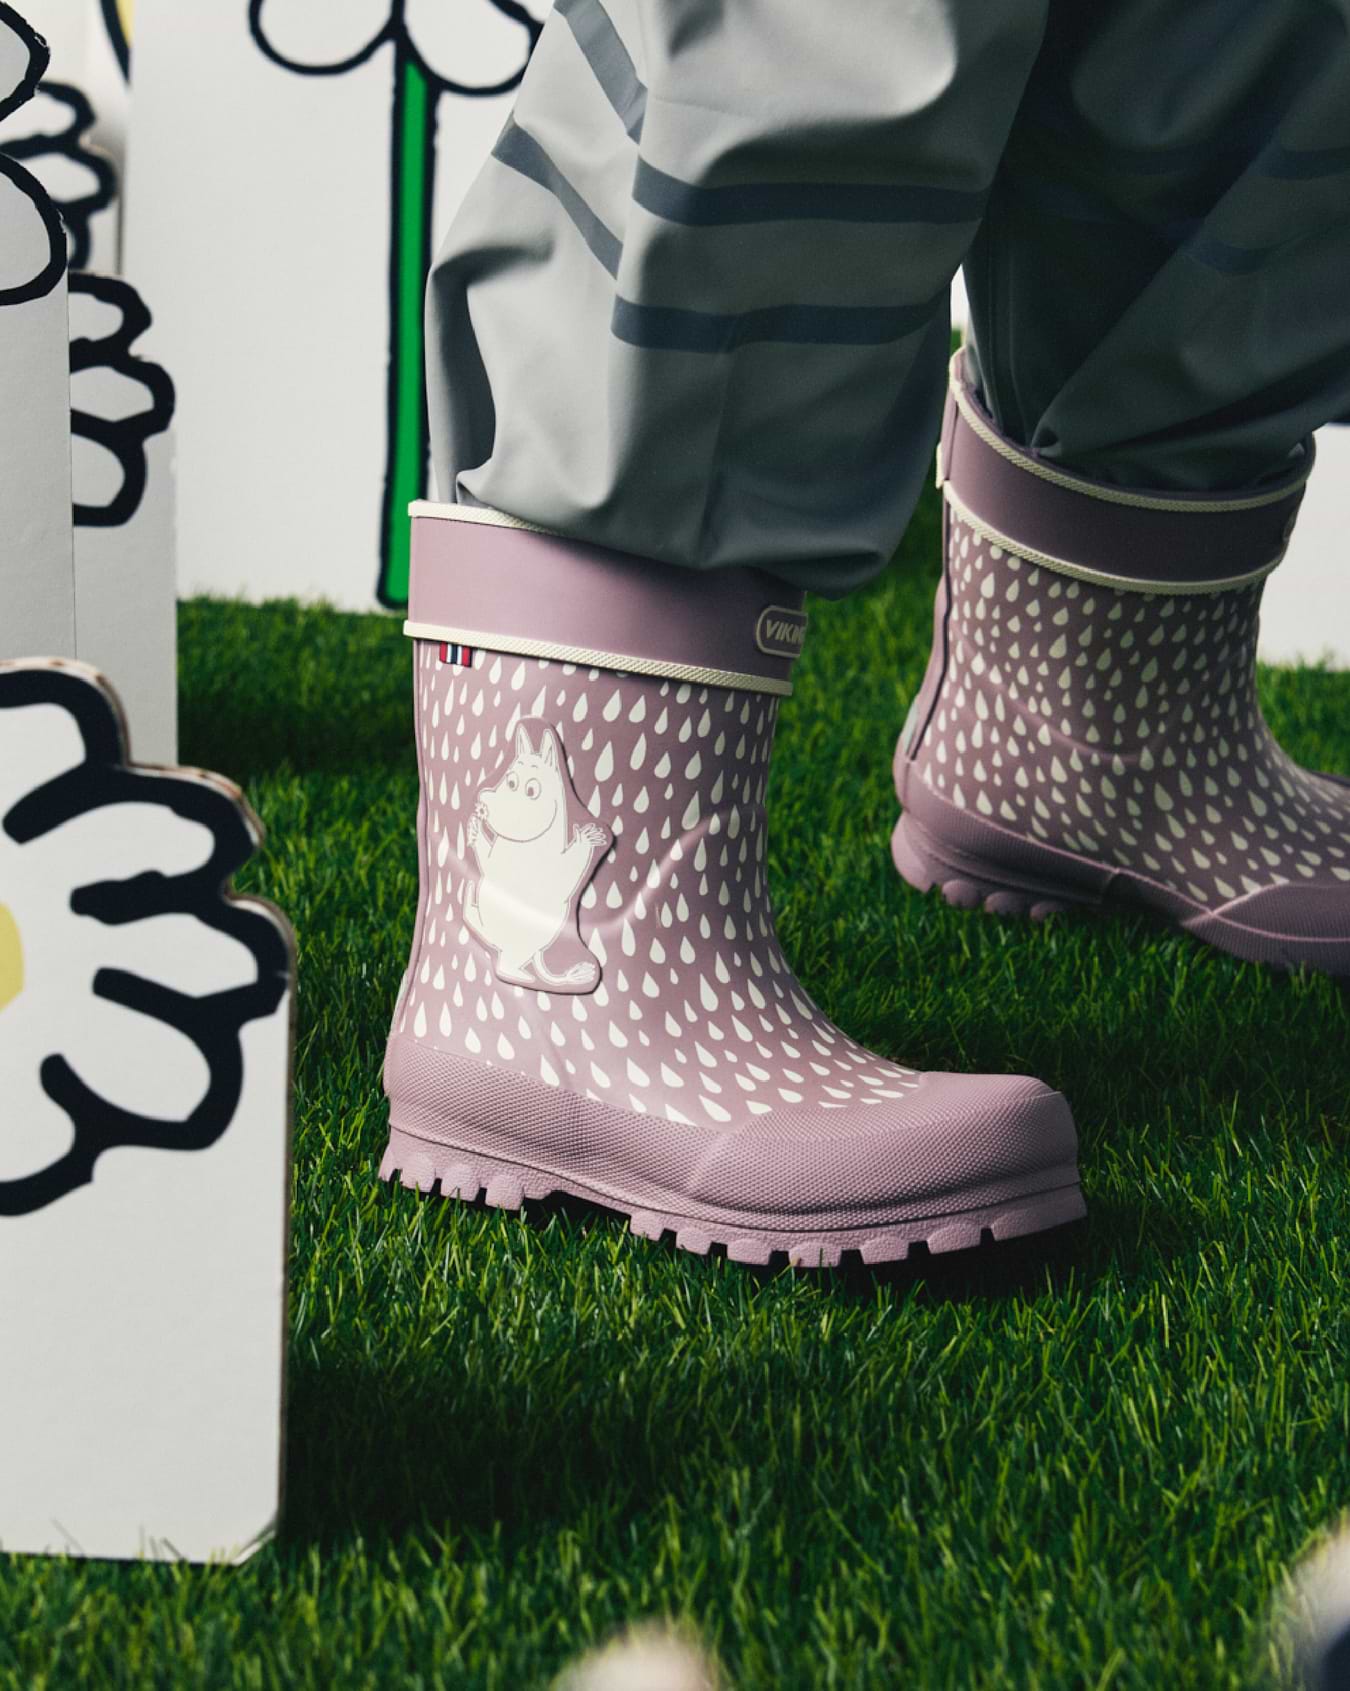 Viking Alv Jolly Moomin Kids Rubber Boots Pink